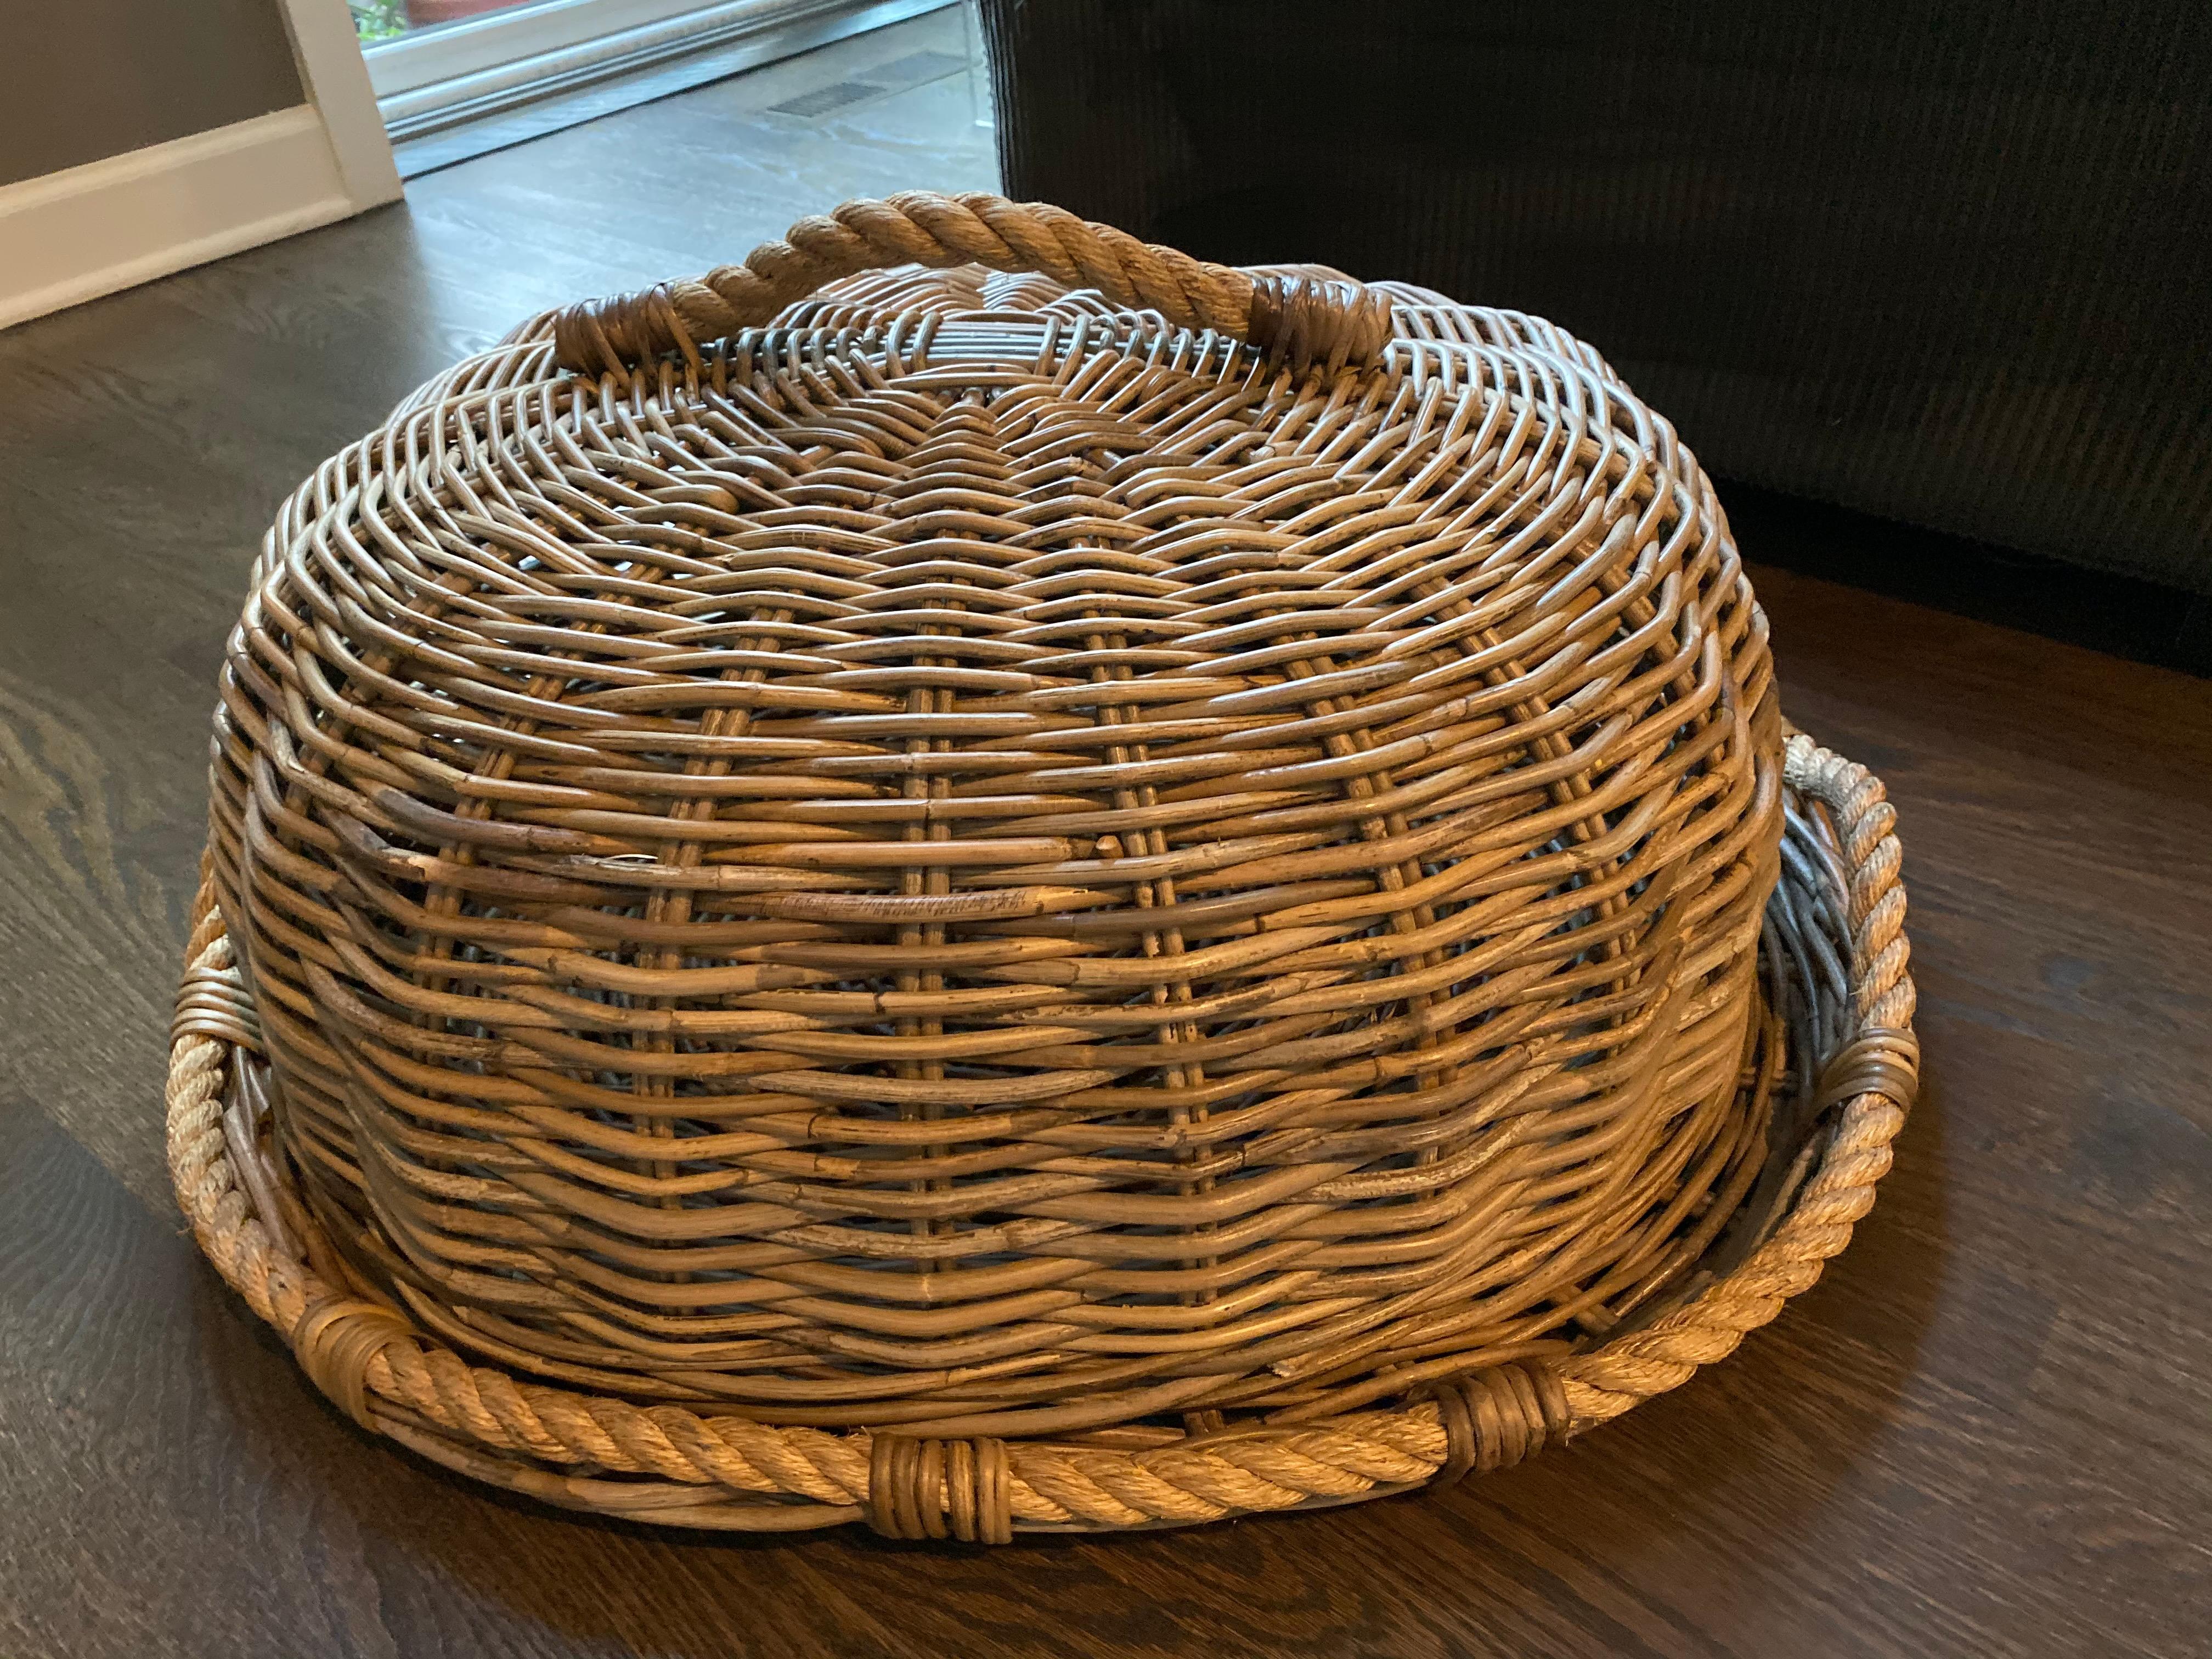 Incredible in the garden, on your buffet, as a centerpiece on your holiday table
oversized restoration hardware handmade rattan tray and cloche
never used.